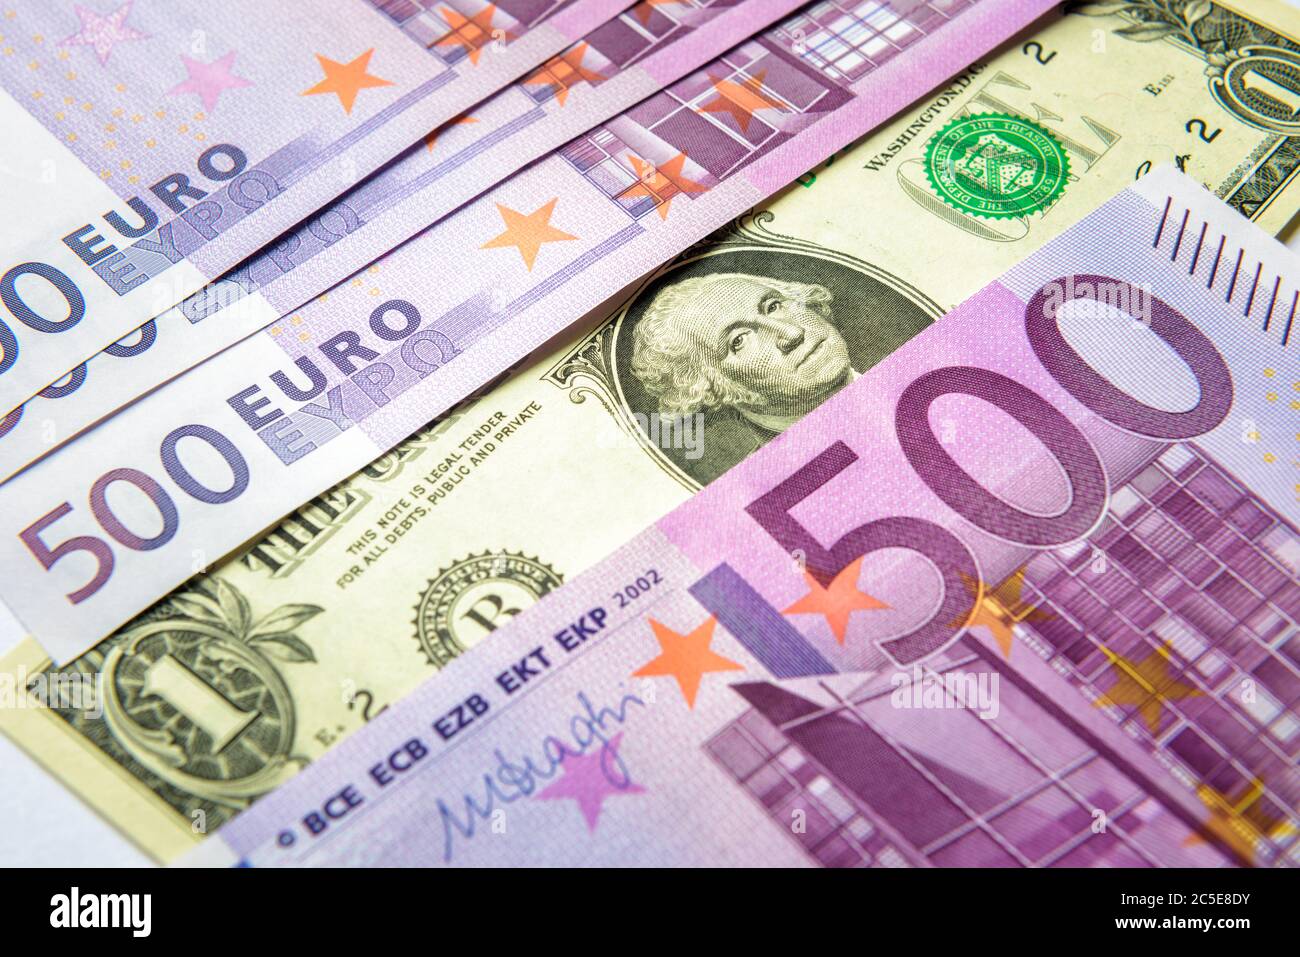 1 dollar bill versus a lot of 500 euro money banknotes. Top view of money cash. European Union currency contra one American dollar note. Concept of st Stock Photo